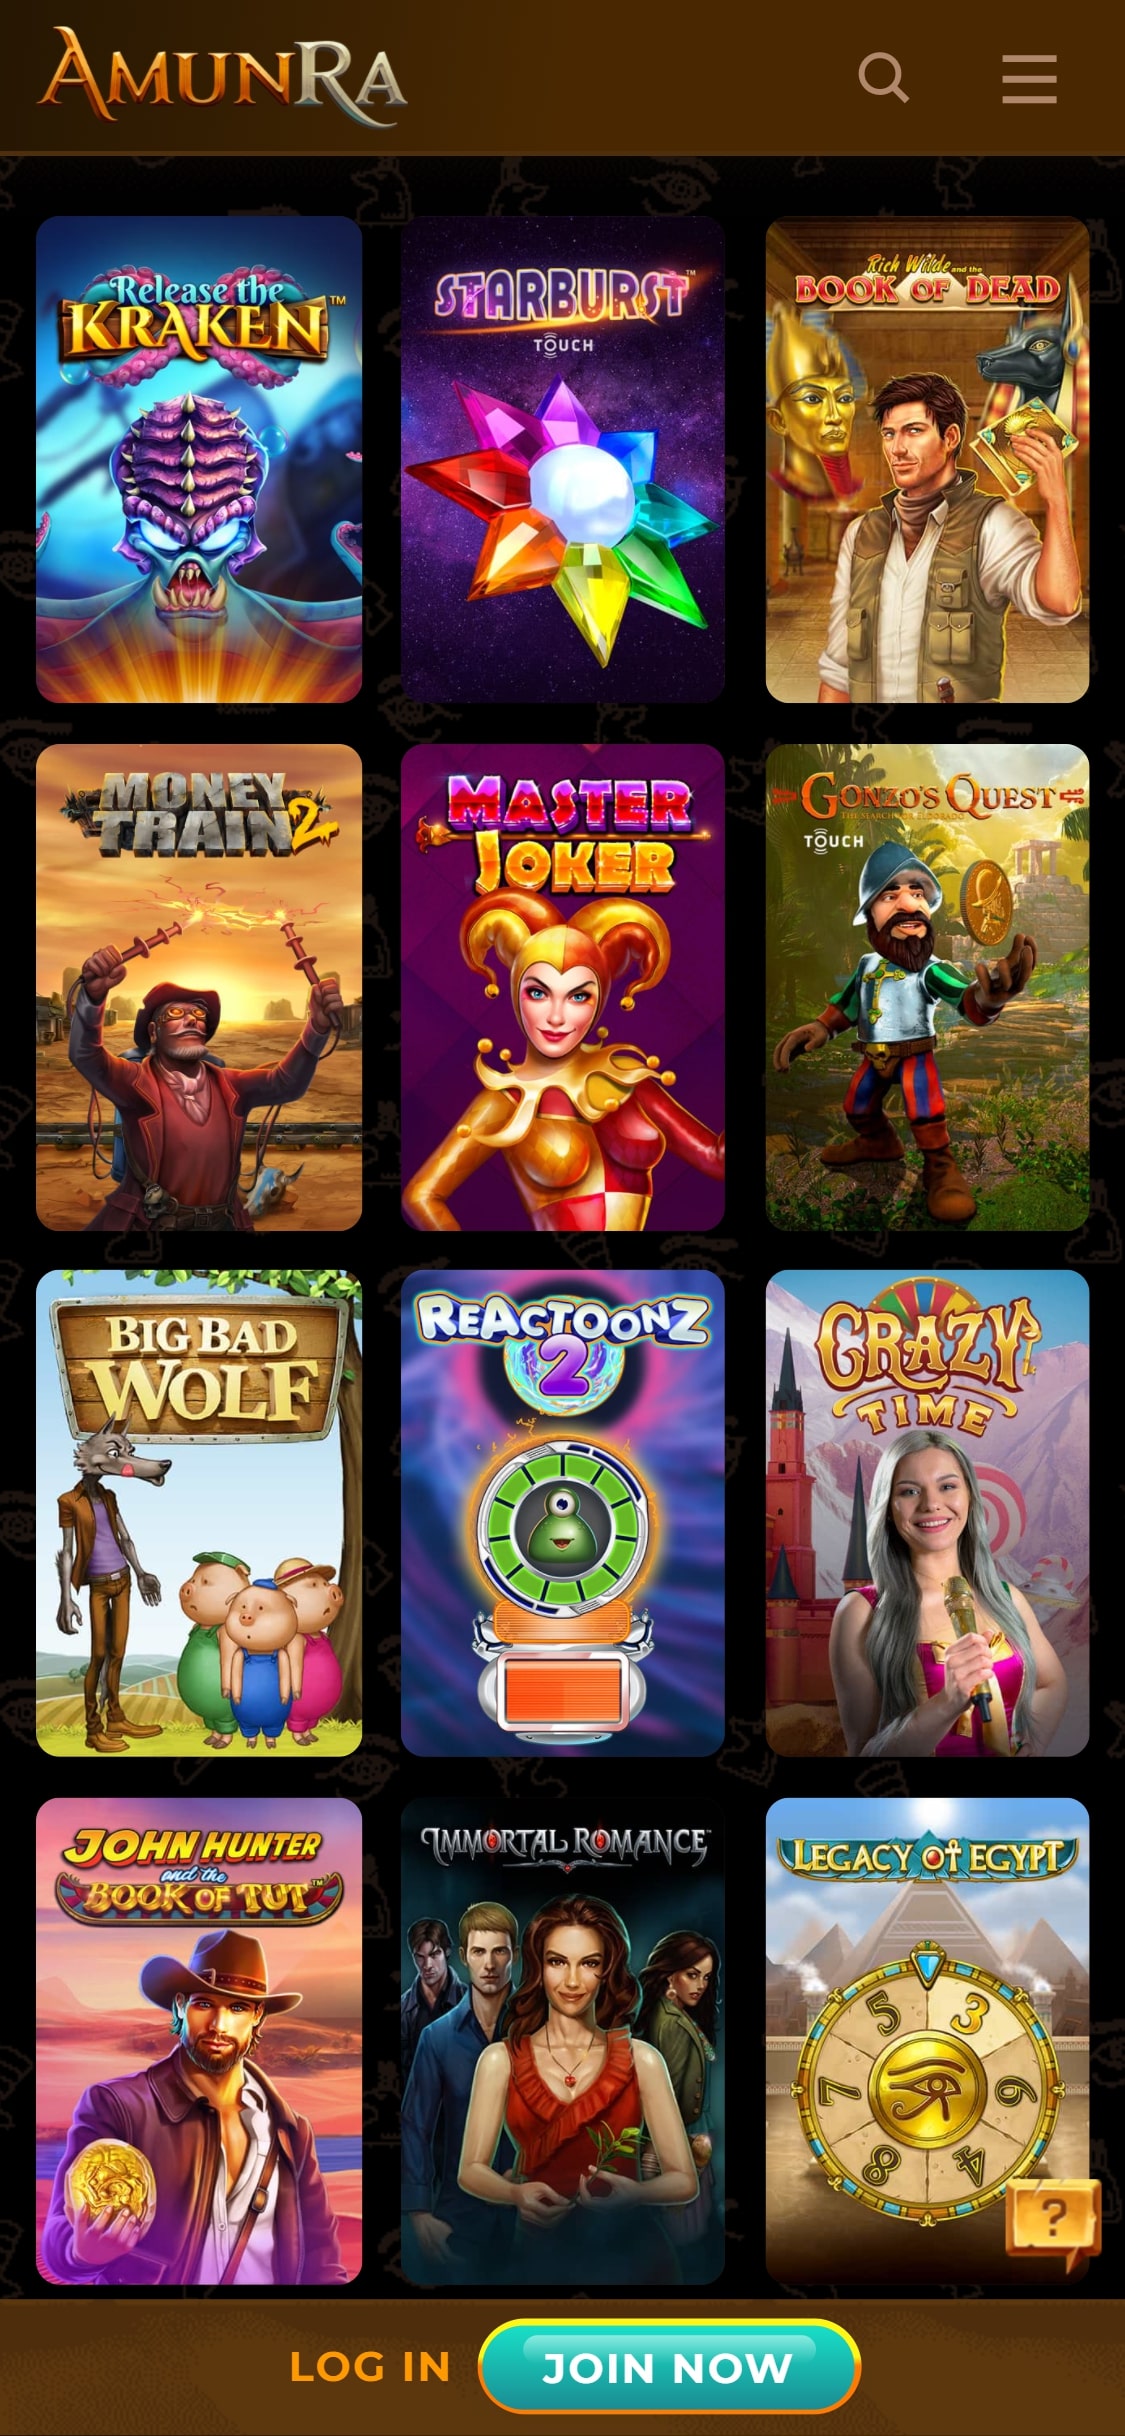 Amunra Casino Mobile Games Review